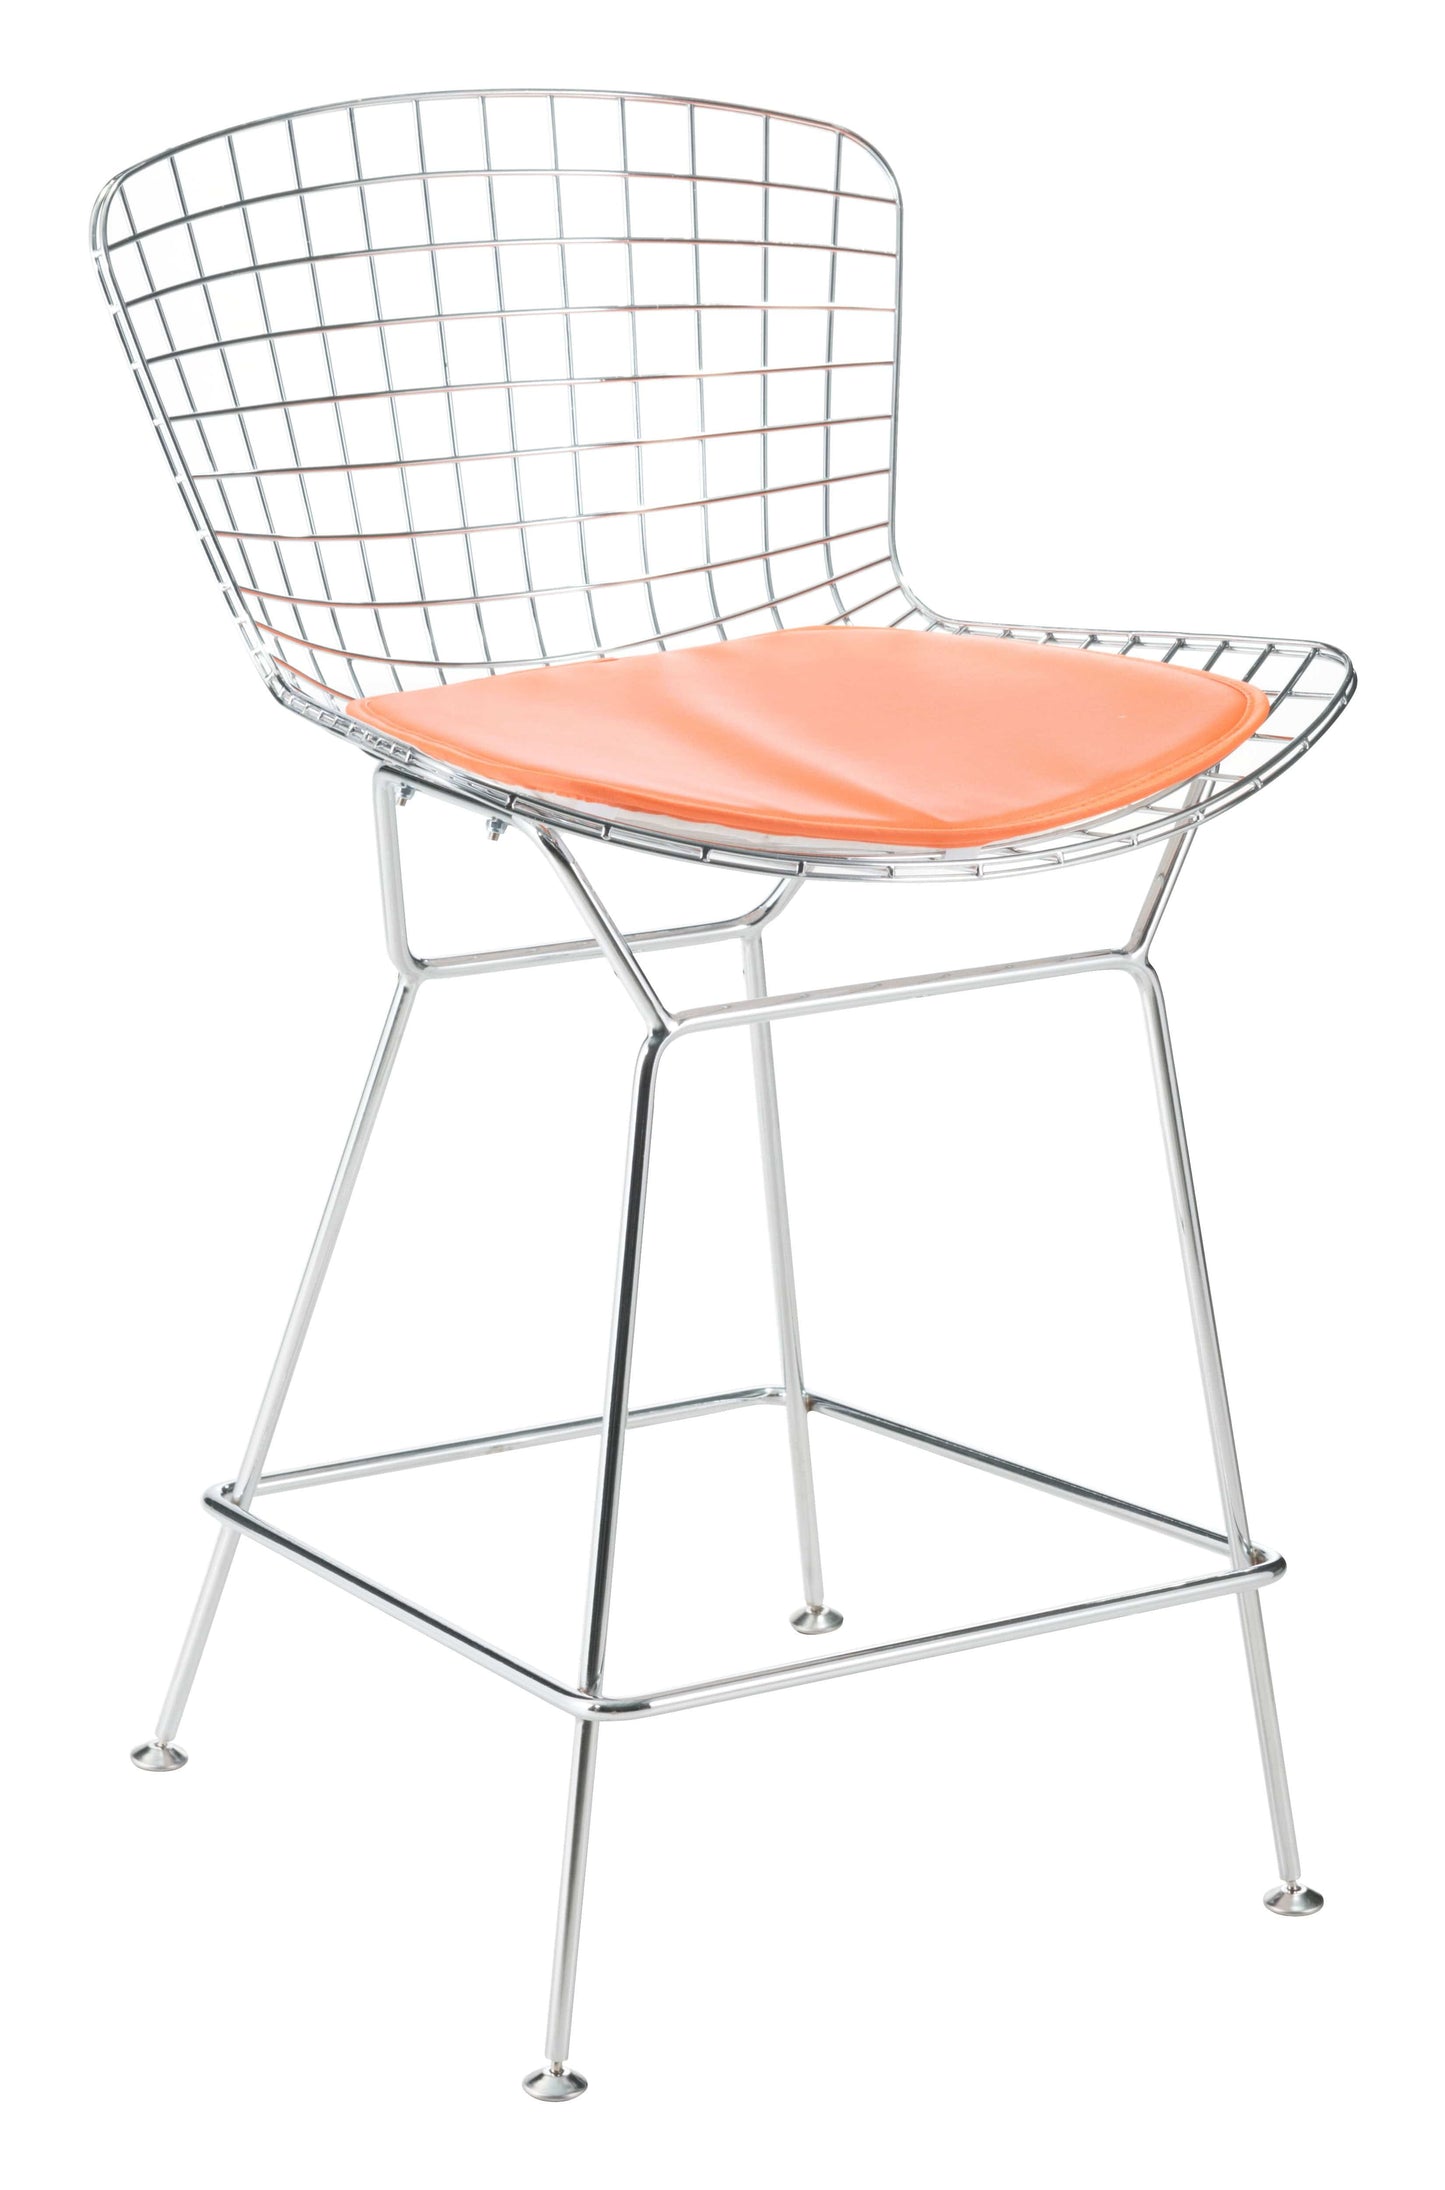 Orange Cushion for Counter Height Stool